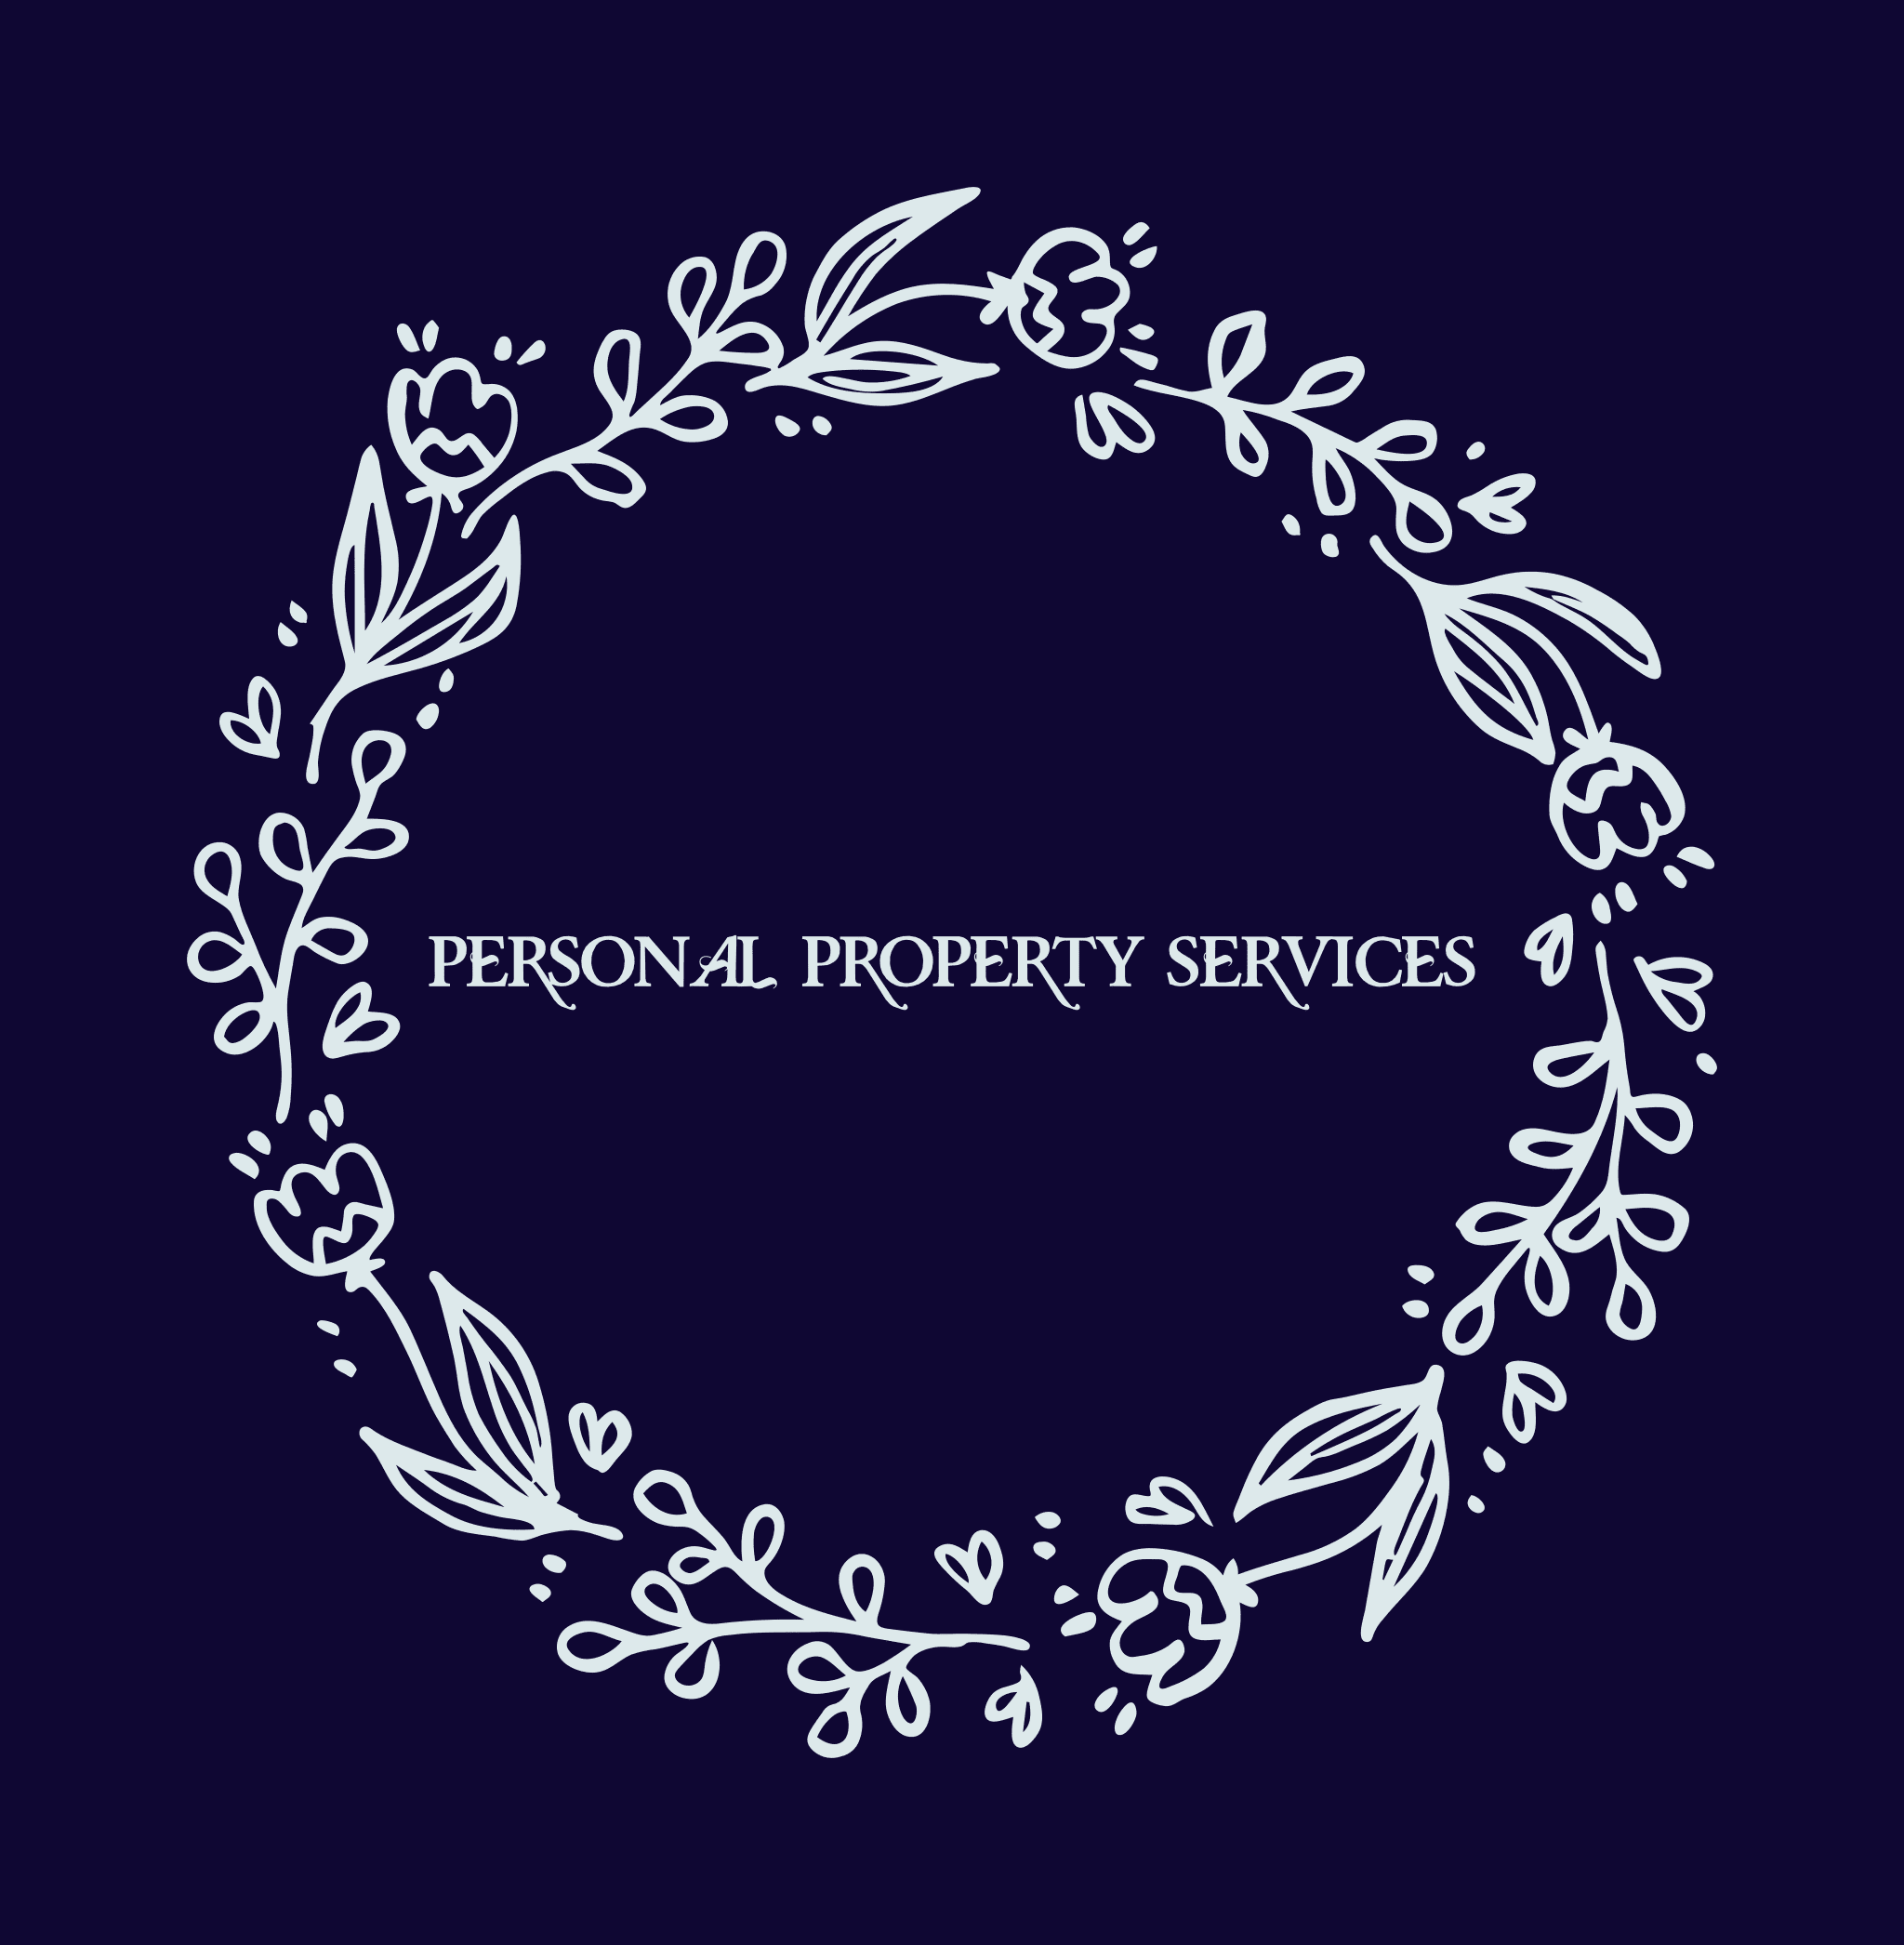 Personal Property Services